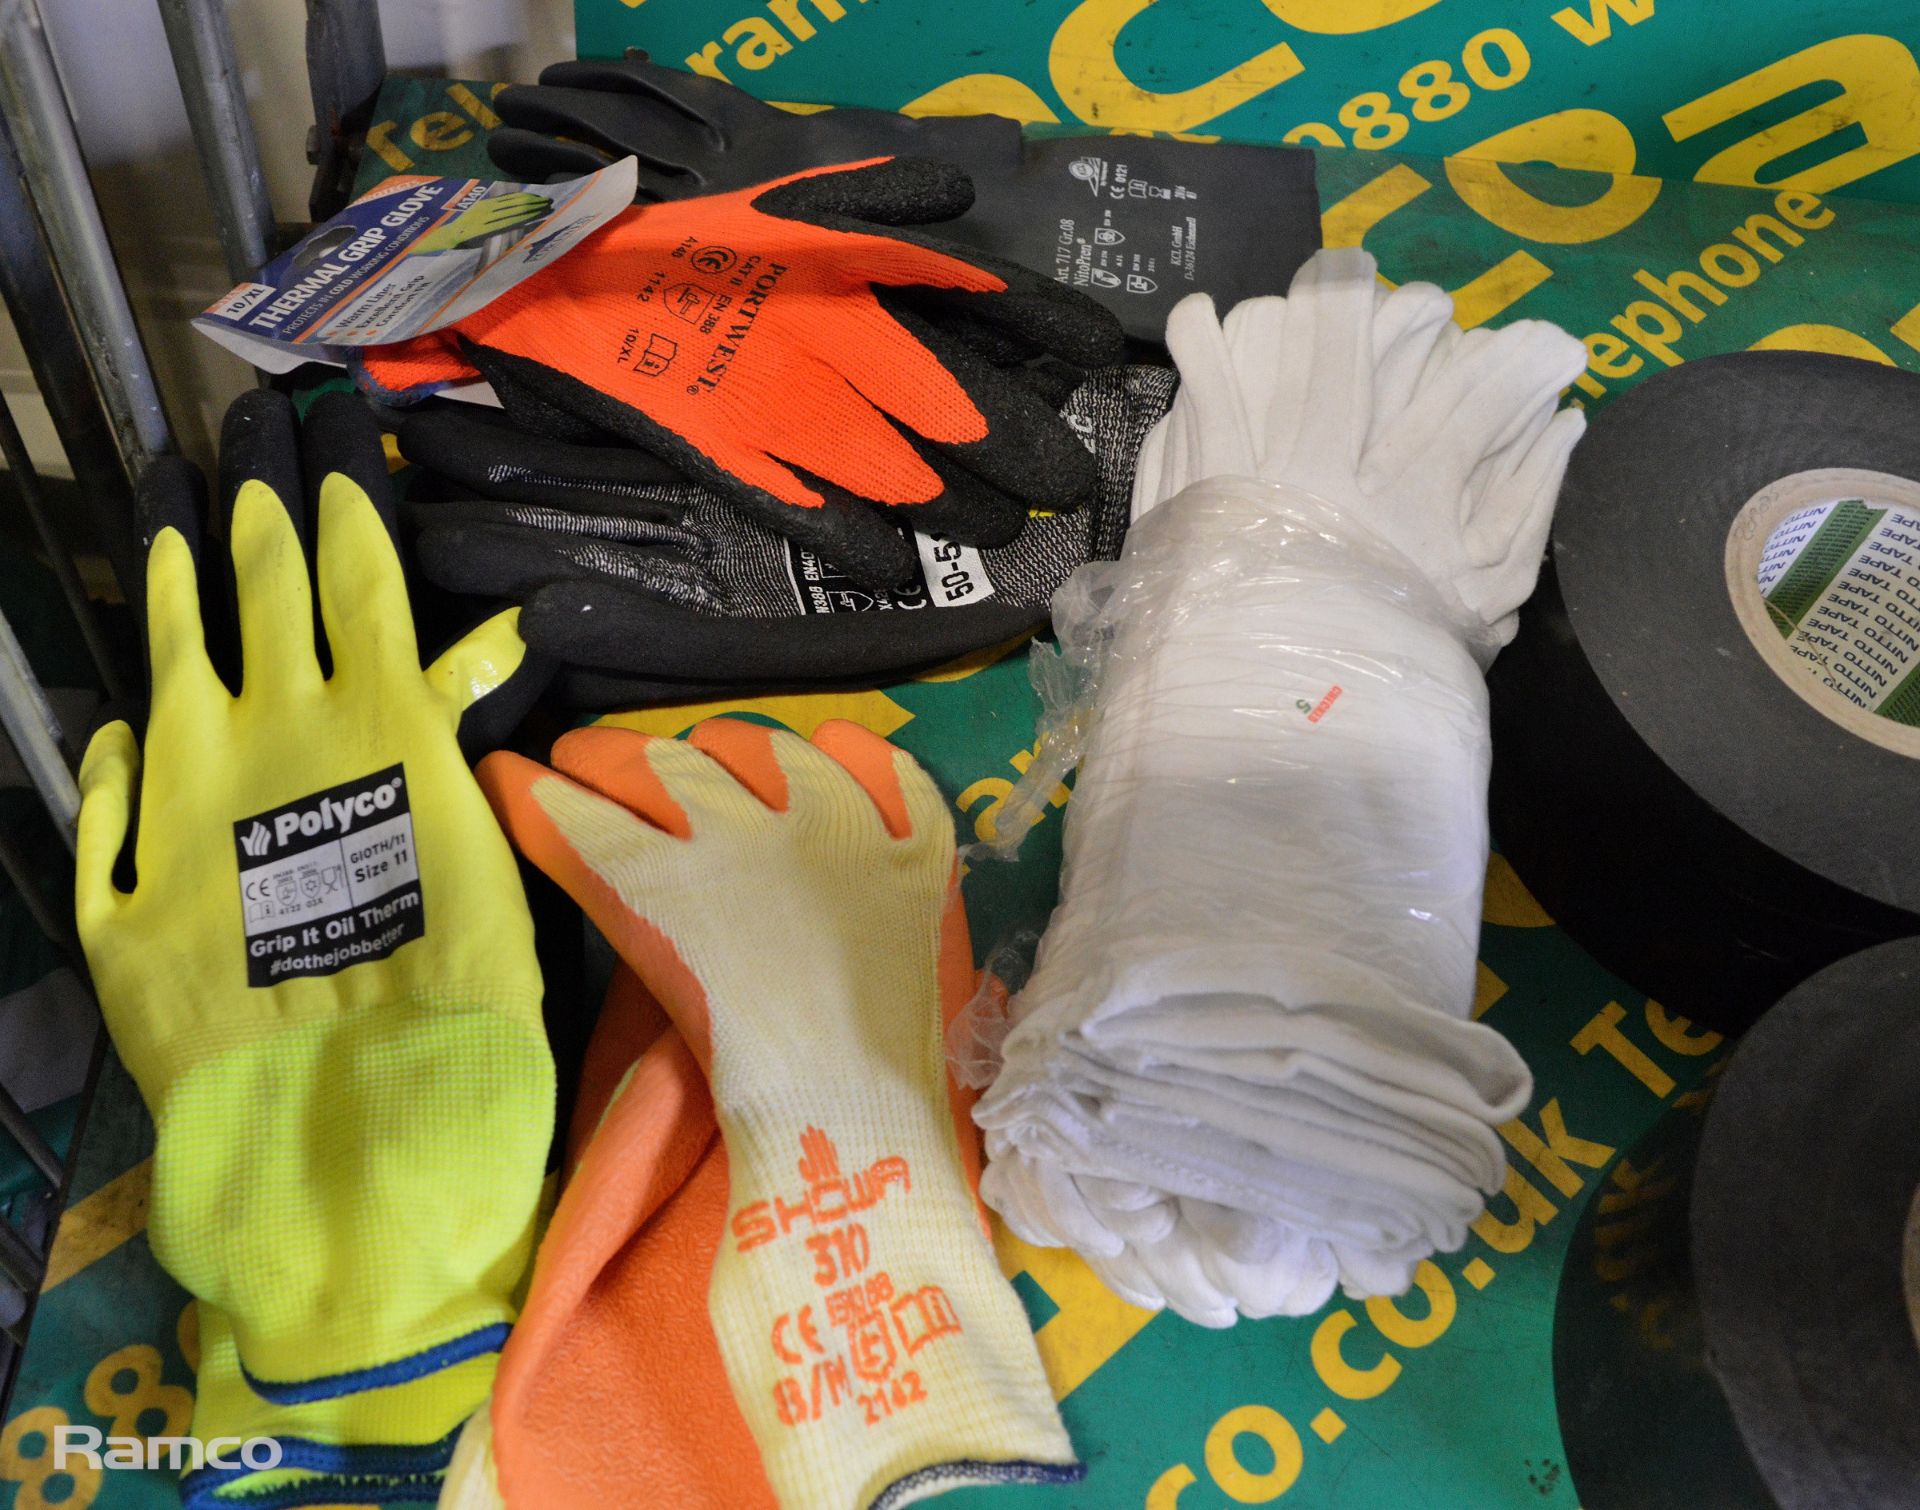 3x Nitto Tape rolls, 5x Teroson VR20 pretreatment, Permaplugs, various work gloves - Image 2 of 6